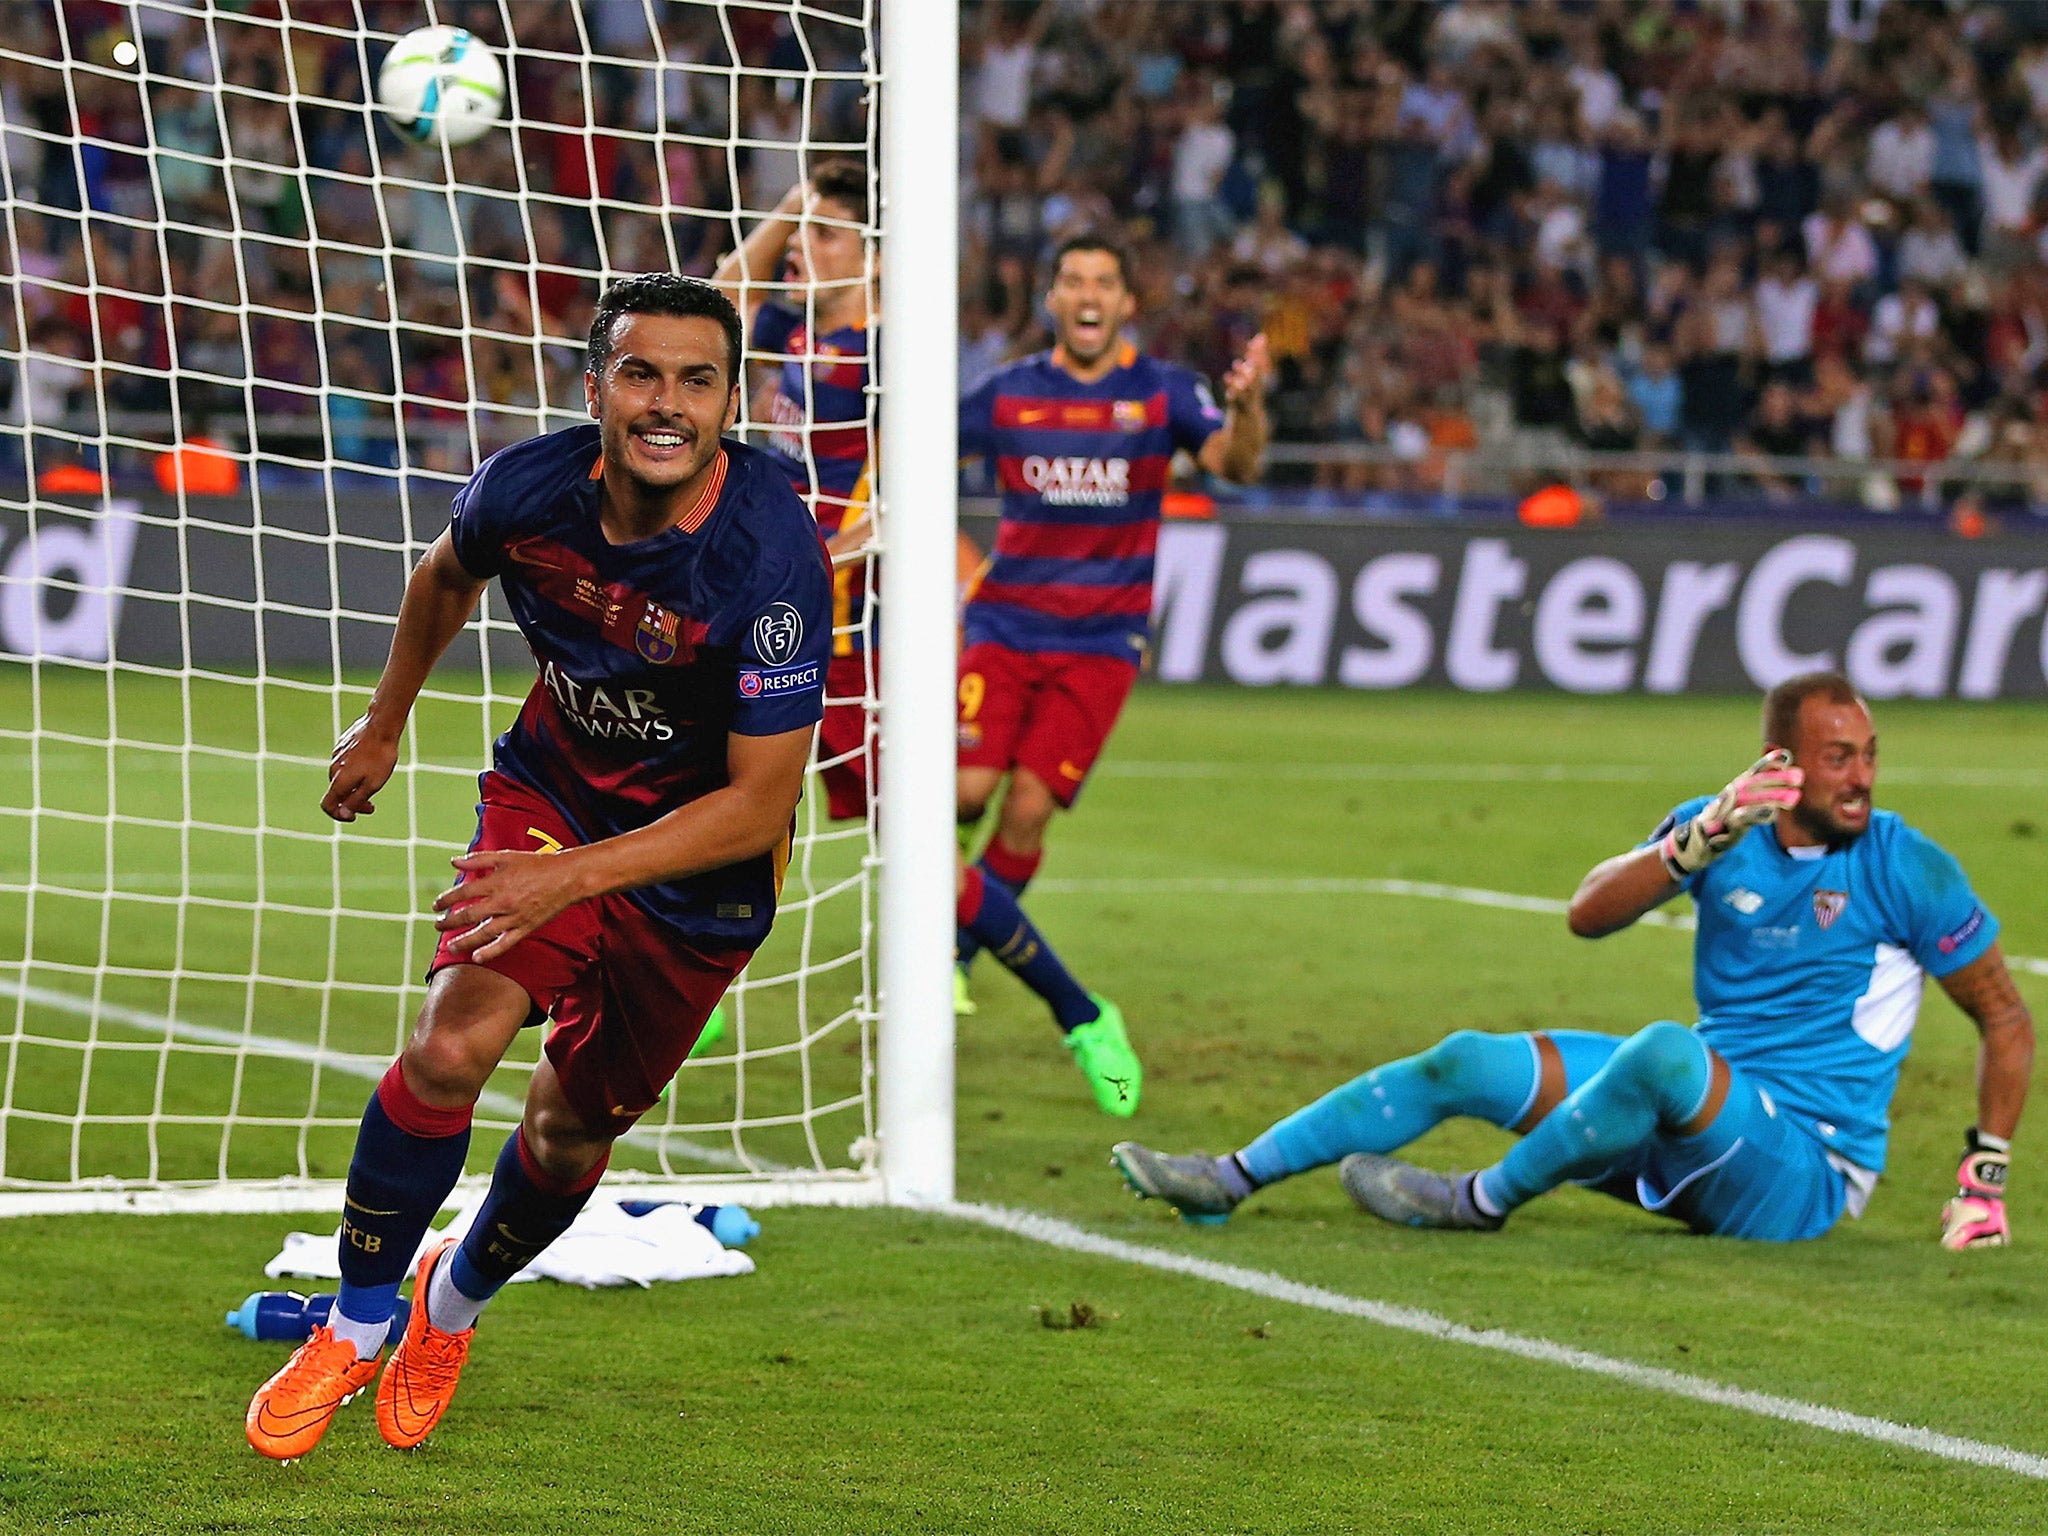 Pedro scored Barcelona's winner as they beat Sevilla 5-4 in the Super Cup on Tuesday night